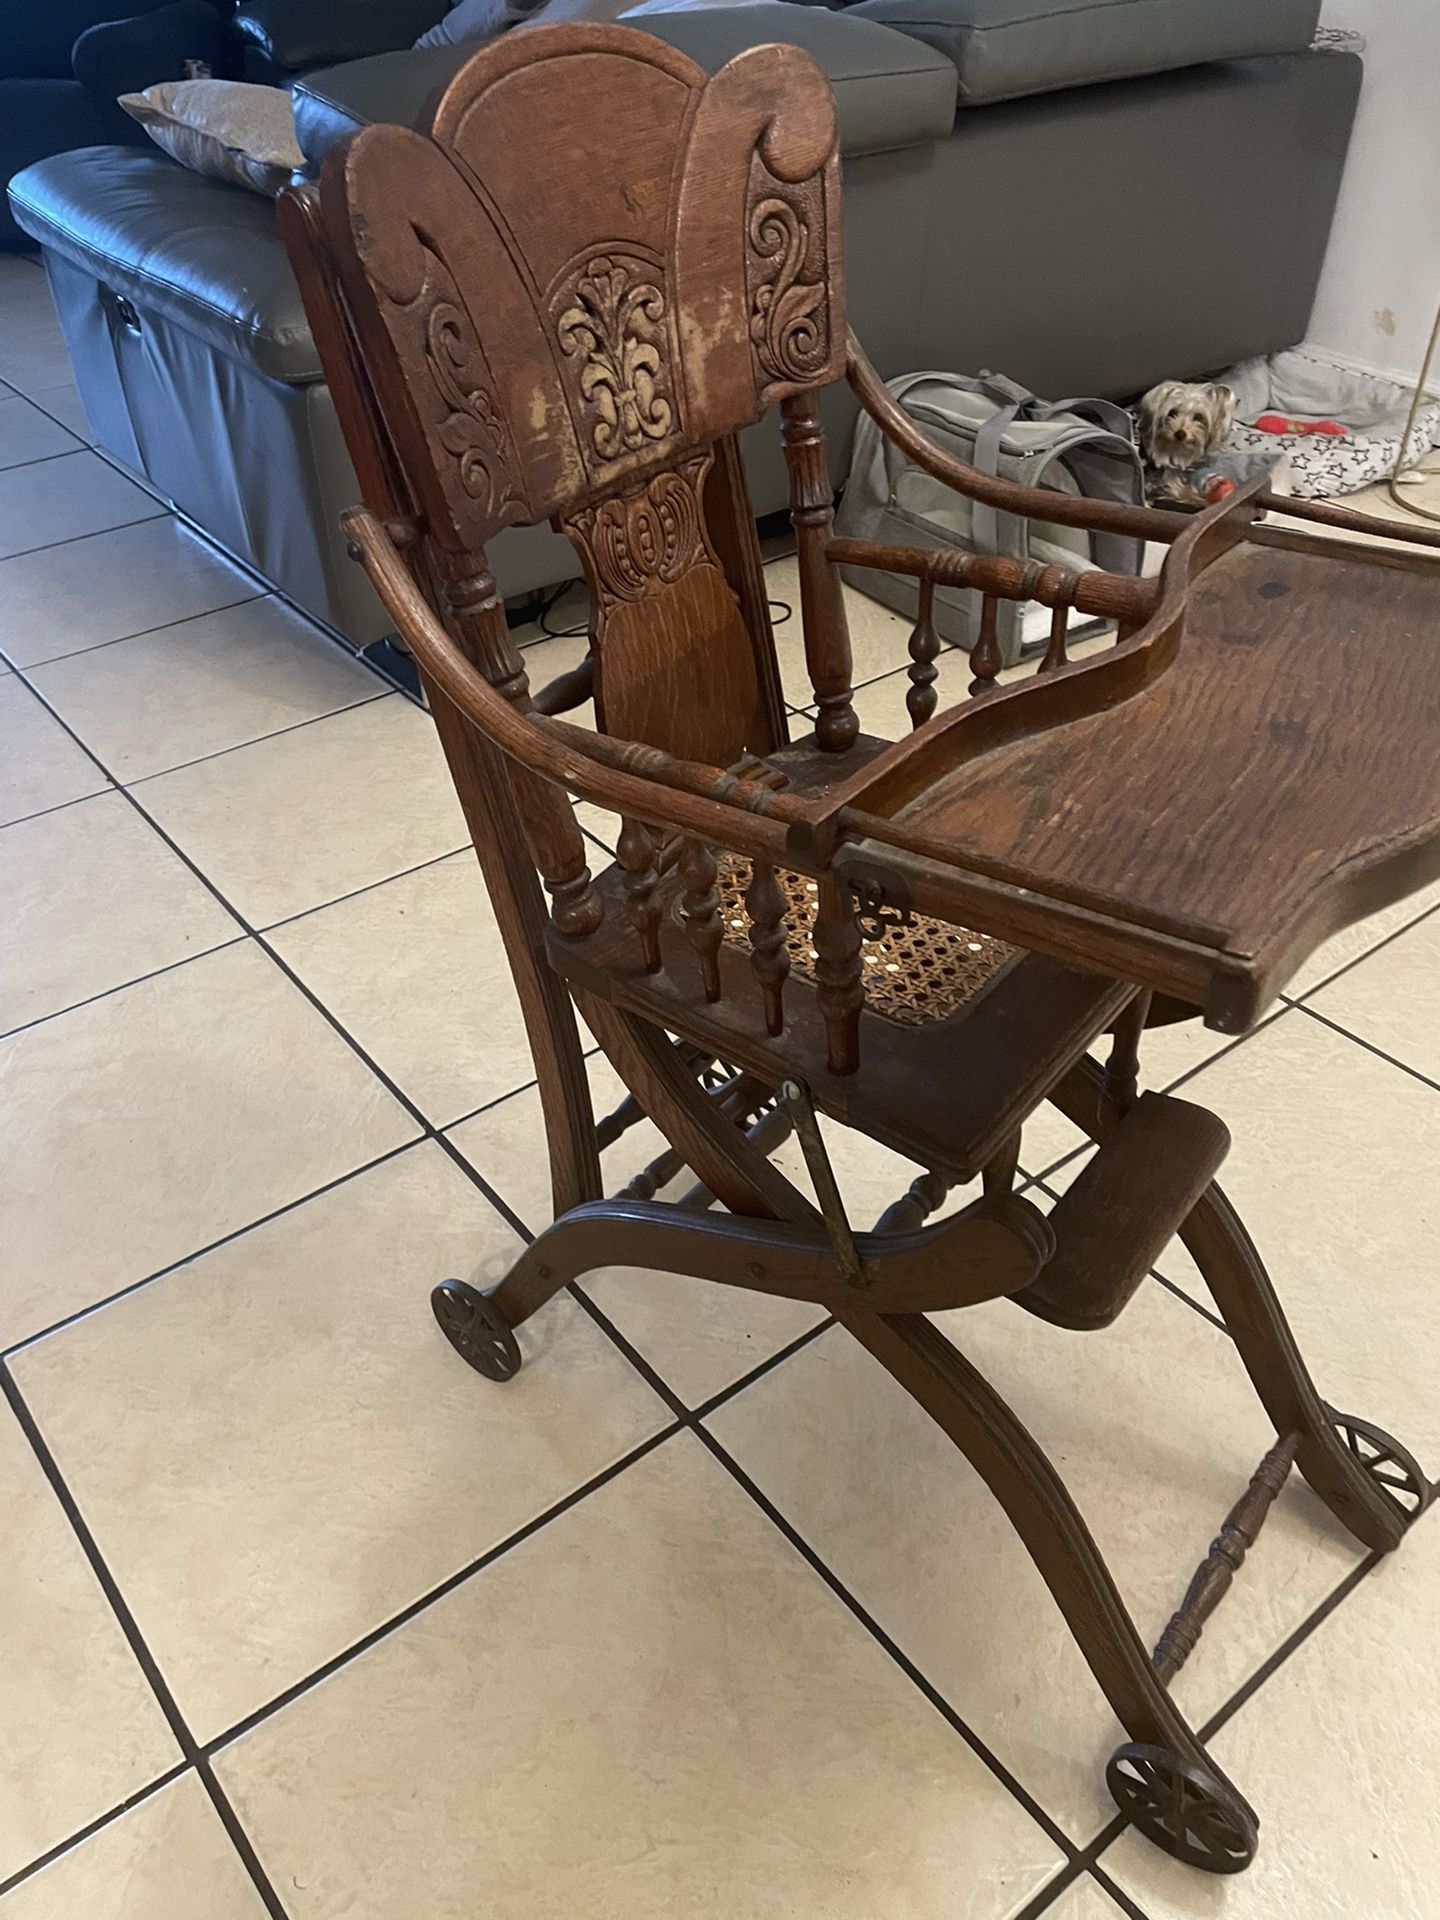 Antique Oak Convertible Pressed Back Victorian High Chair to Stroller 1890s Era 